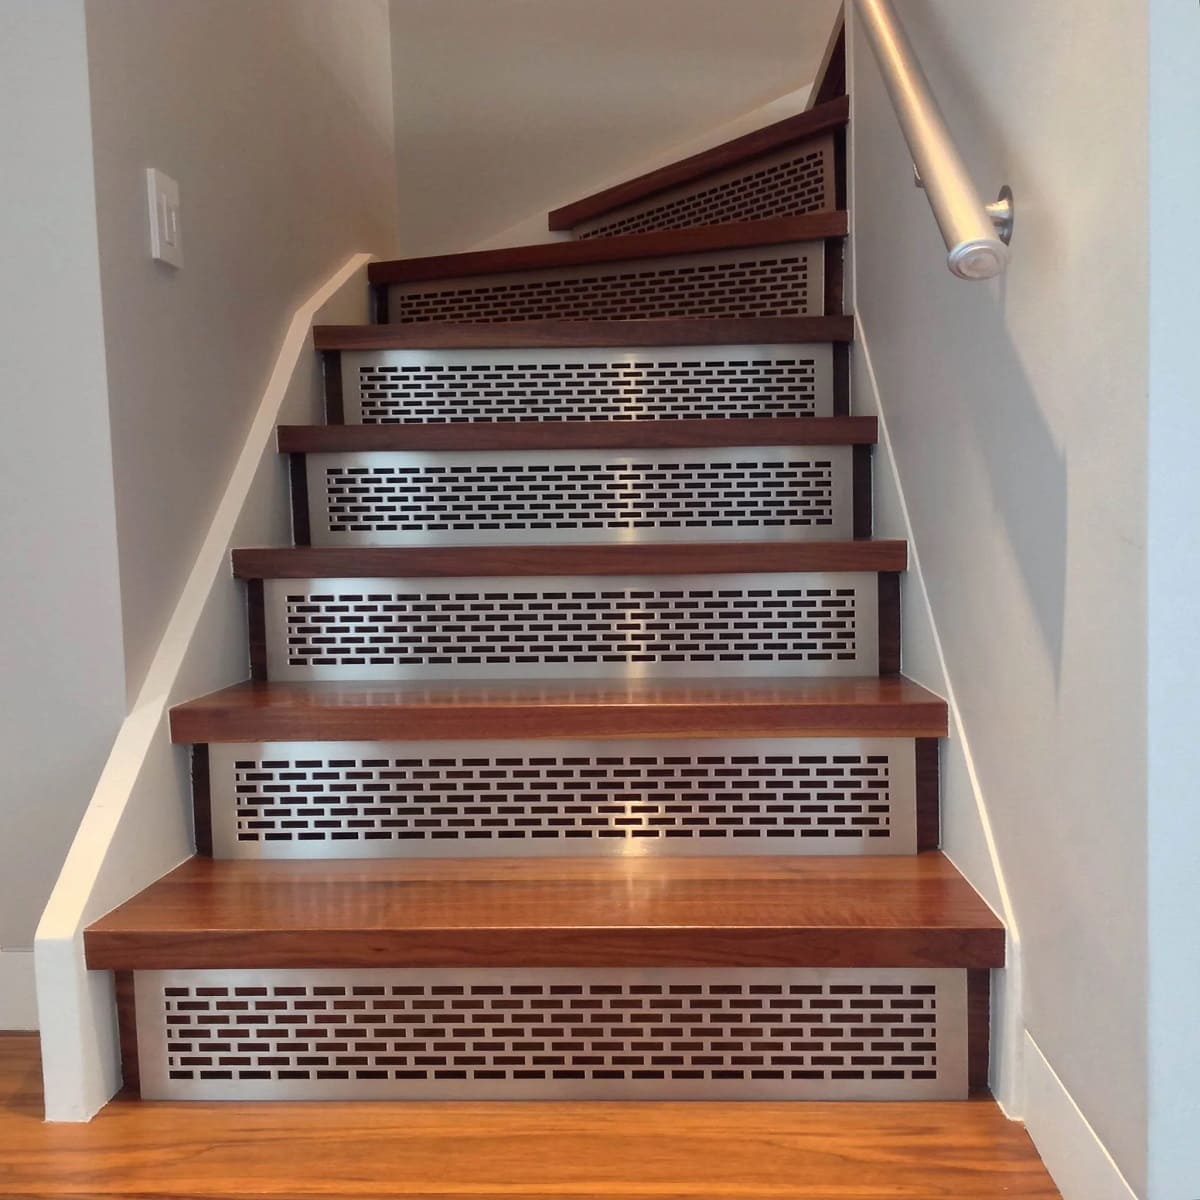 How To Install Stair Treads And Risers Over Existing Stairs